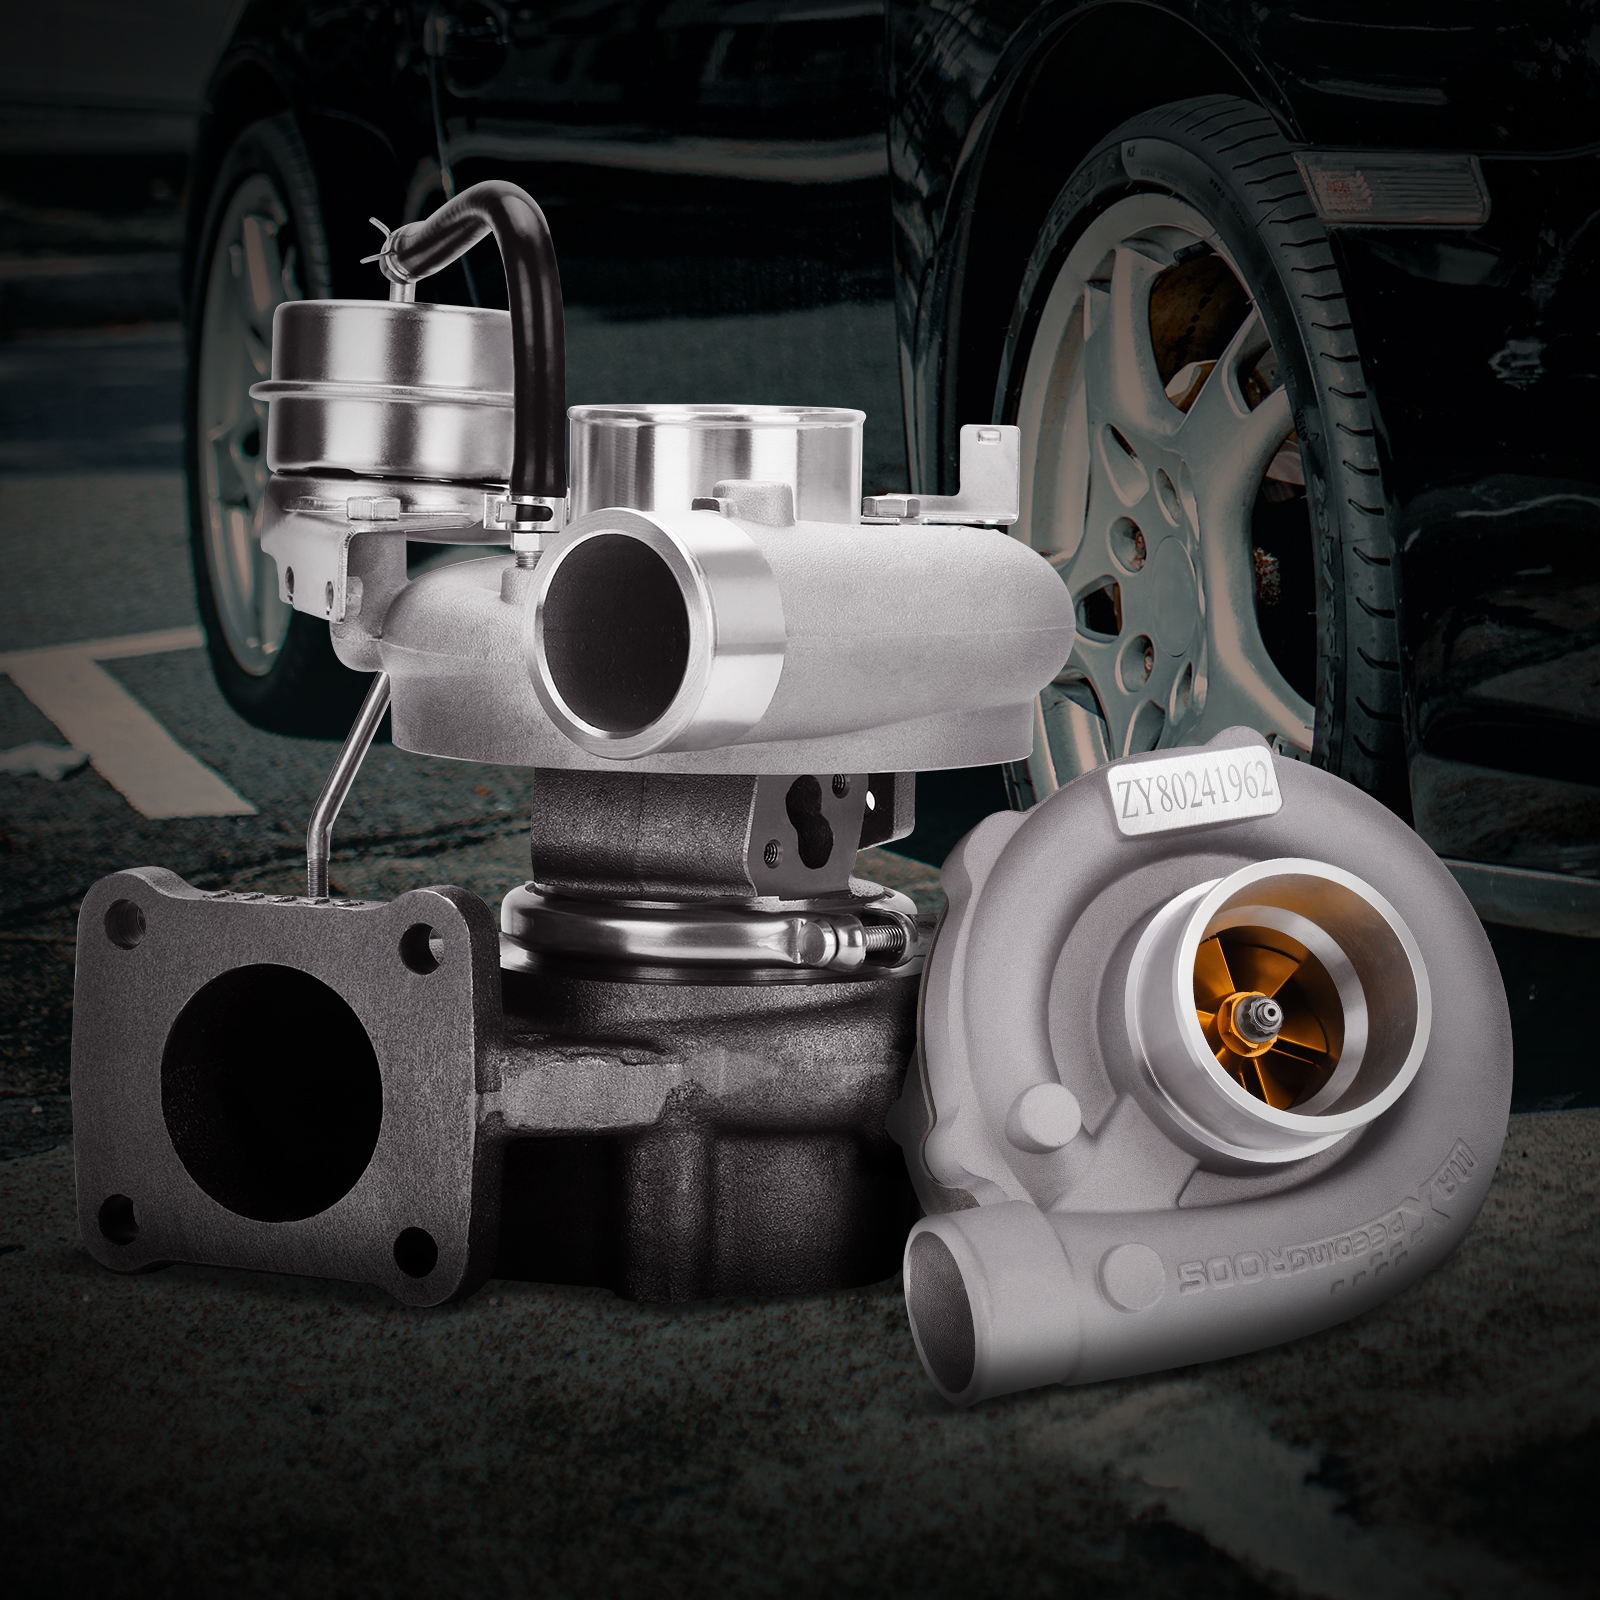 MaXpeedingRods Blog | An Automotive Blog from MaXpeedingRods - How to choose a right Turbo for your car